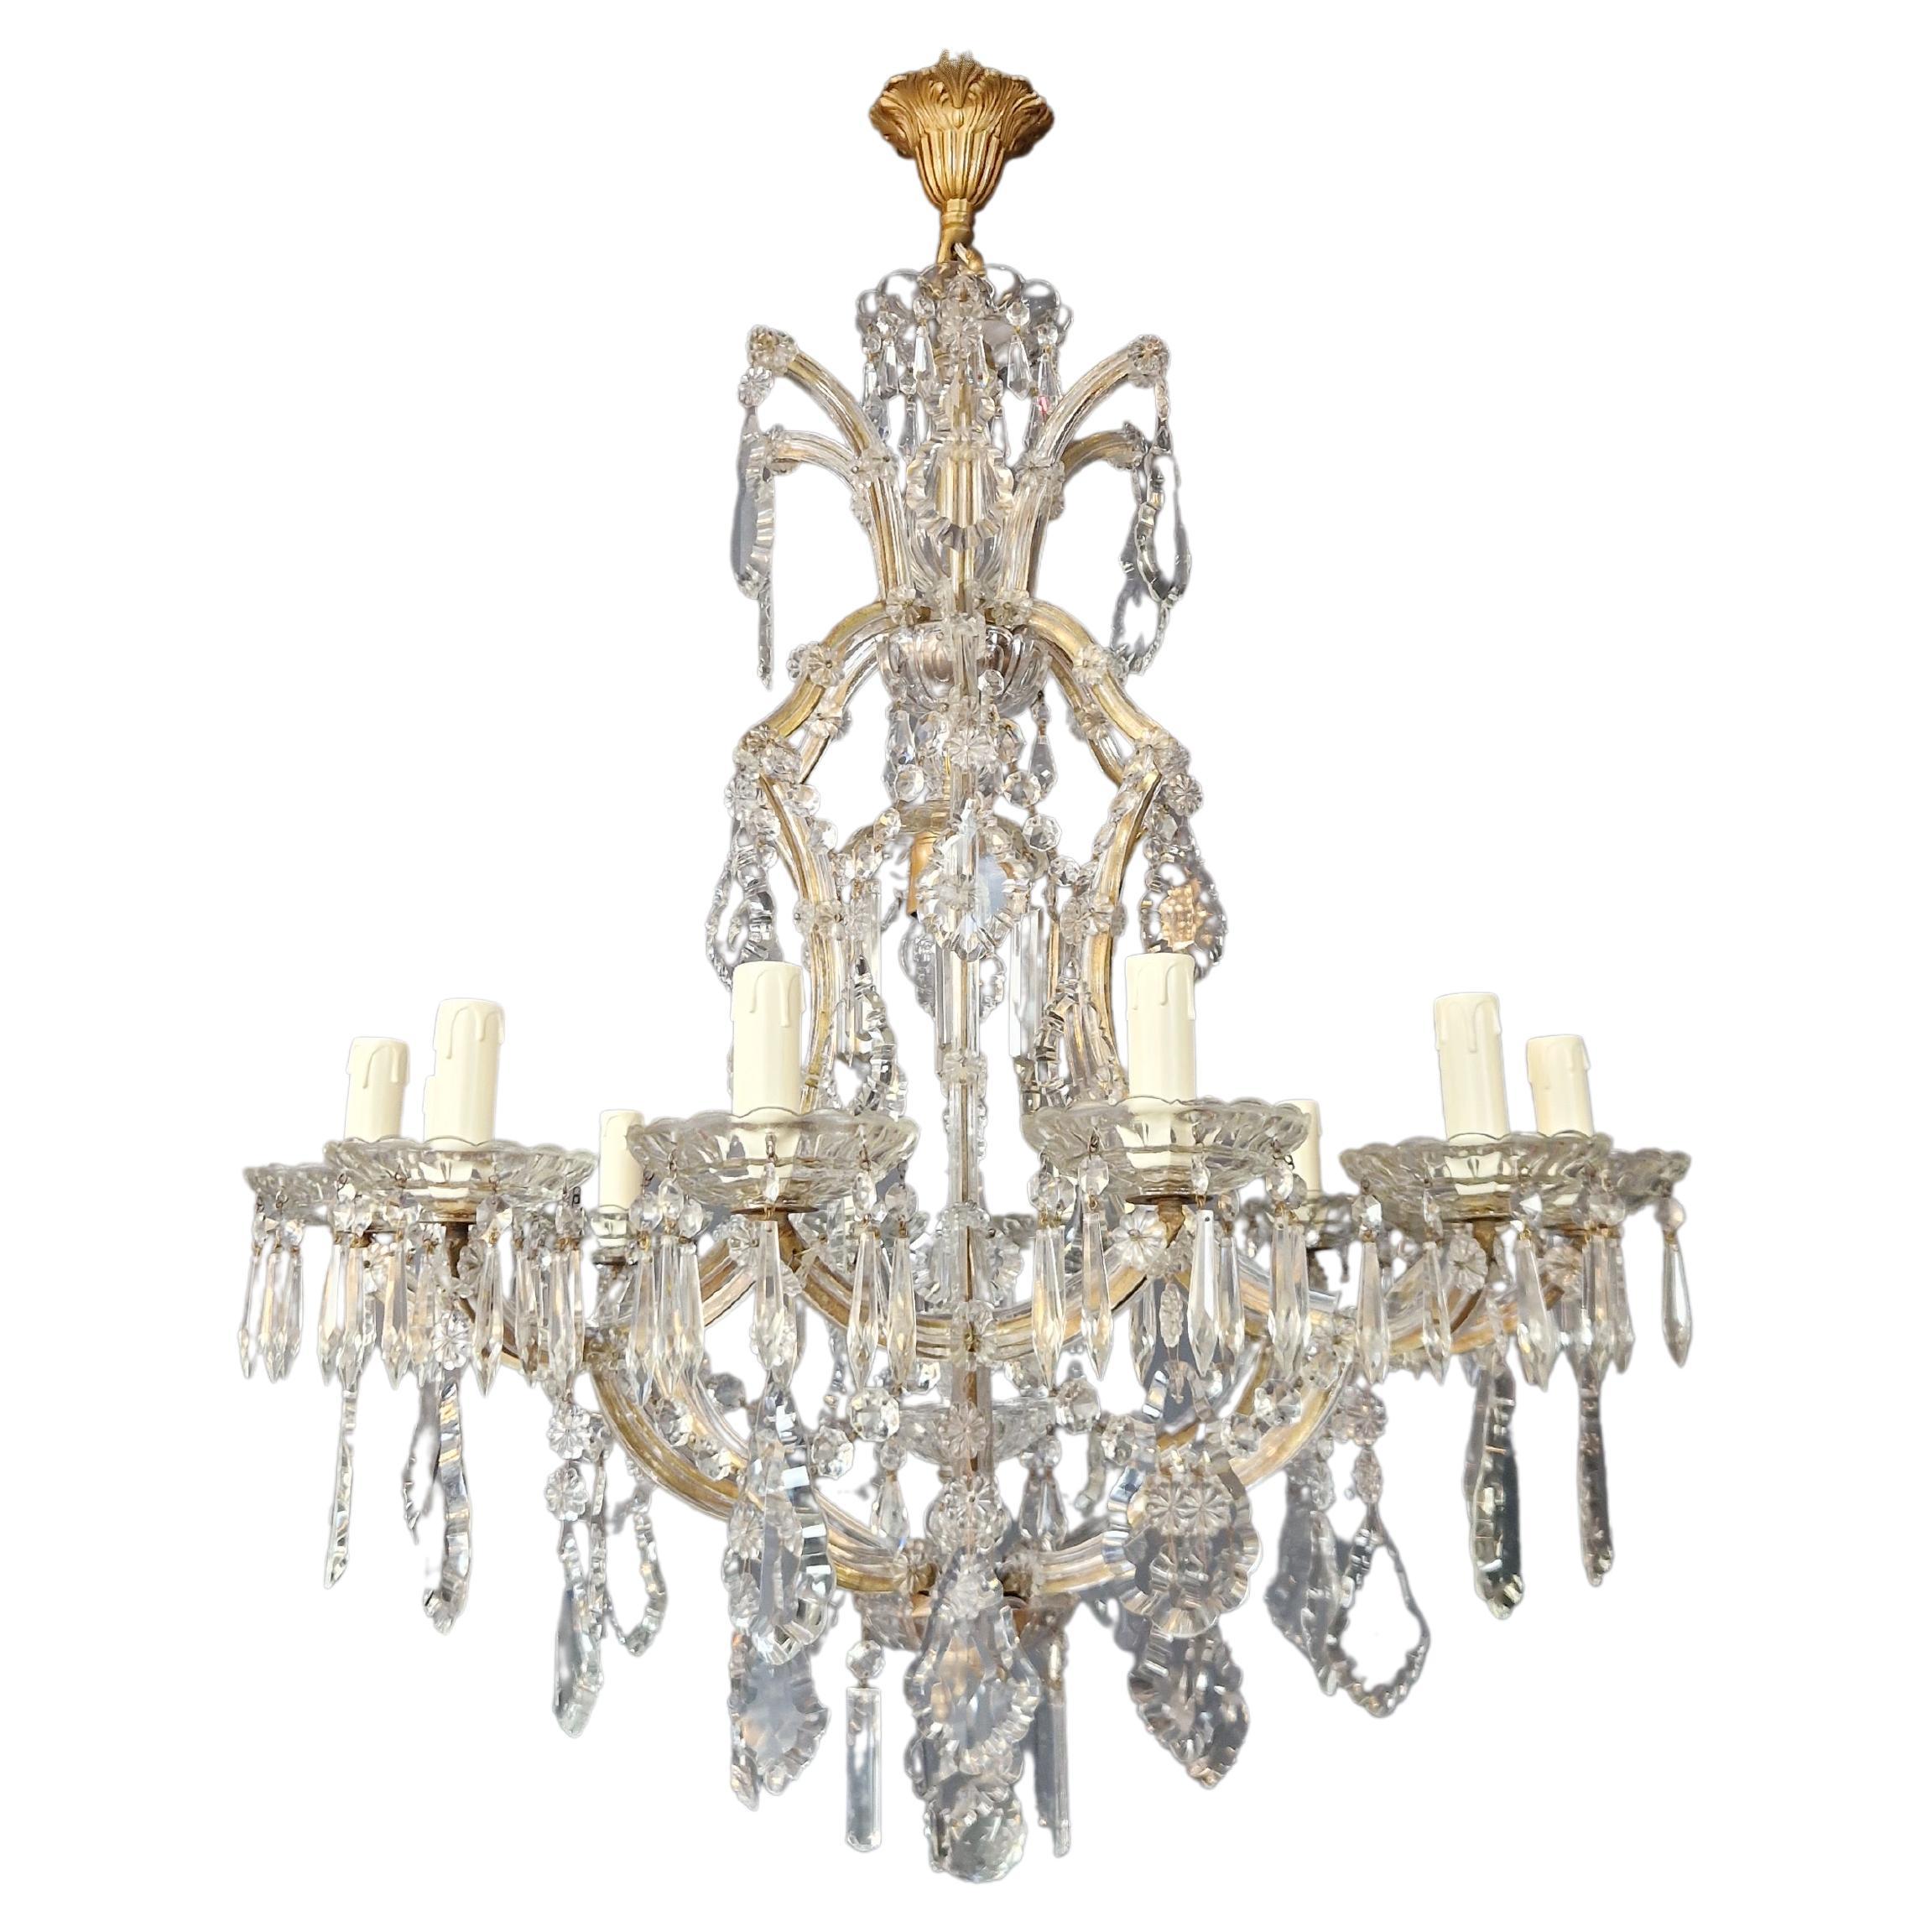 Maria Theresa Crystal Chandelier Antique Classic Clear Glass For Sale